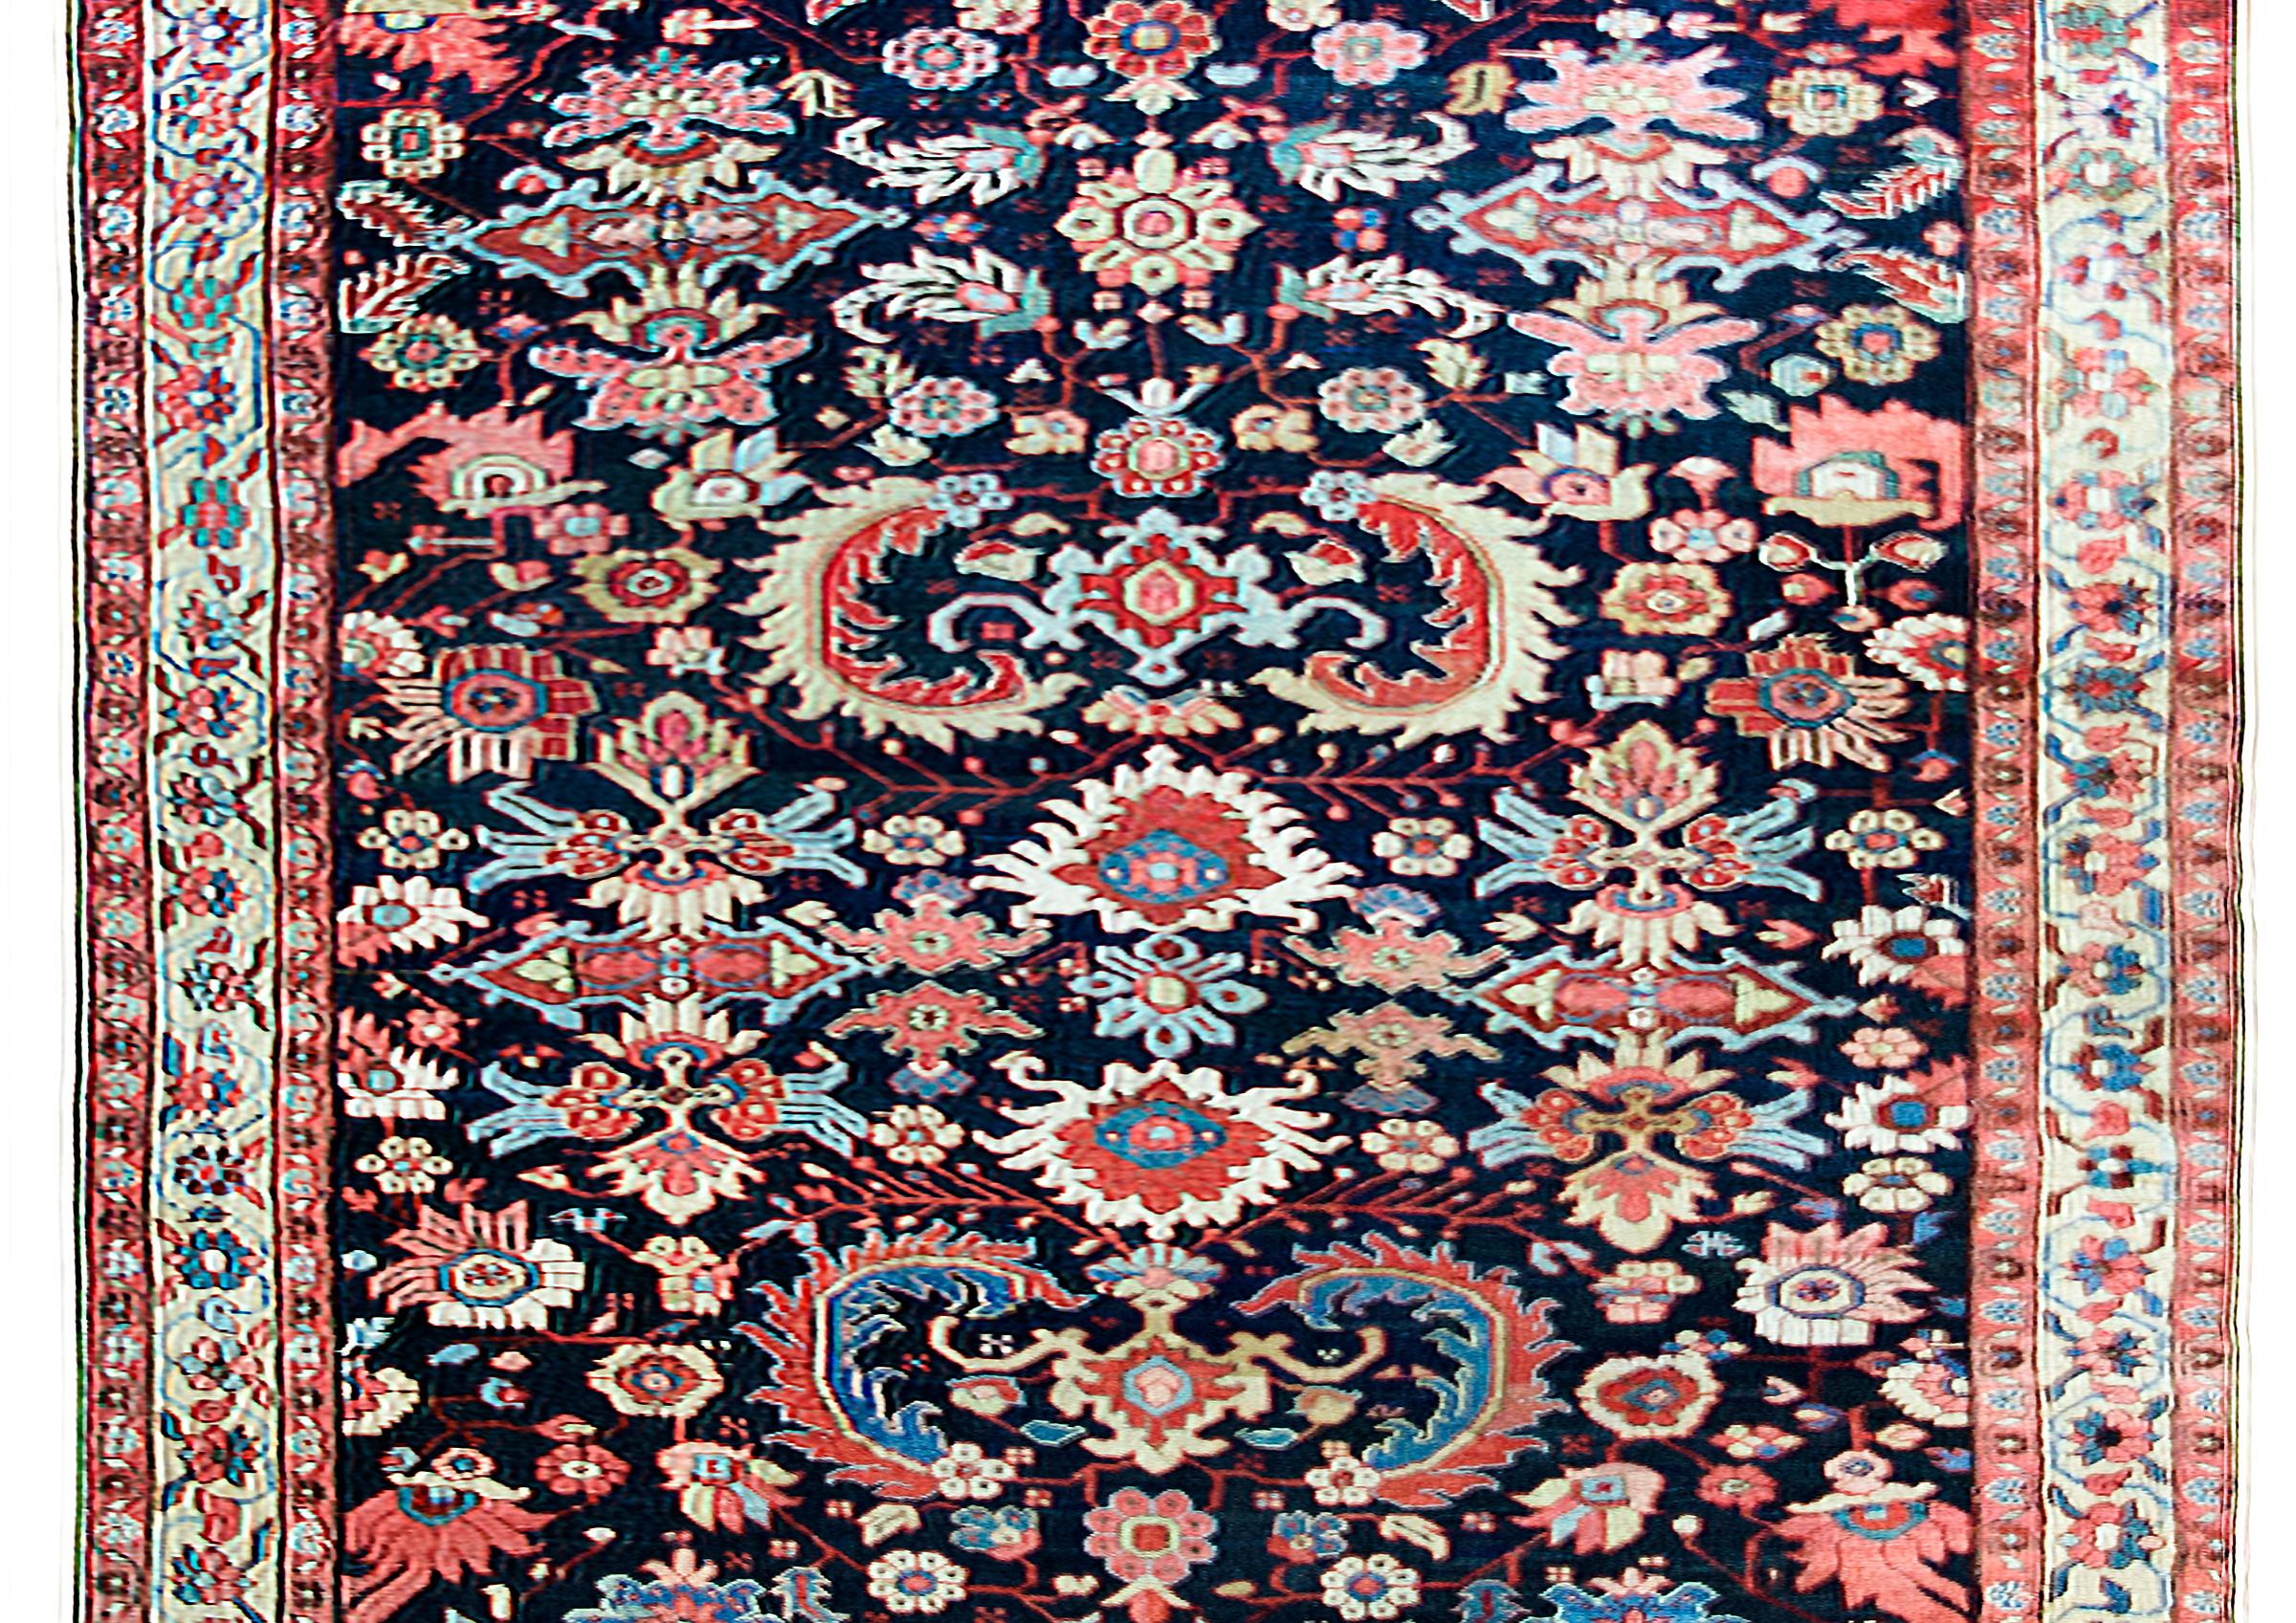 A stunning early 20th century Persian Heriz rug with an all-over mirrored floral pattern with myriad stylized large-scale flowers and leaves woven in crimson, pink, light and dark indigo, cream and brown, and set against a dark indigo background. 